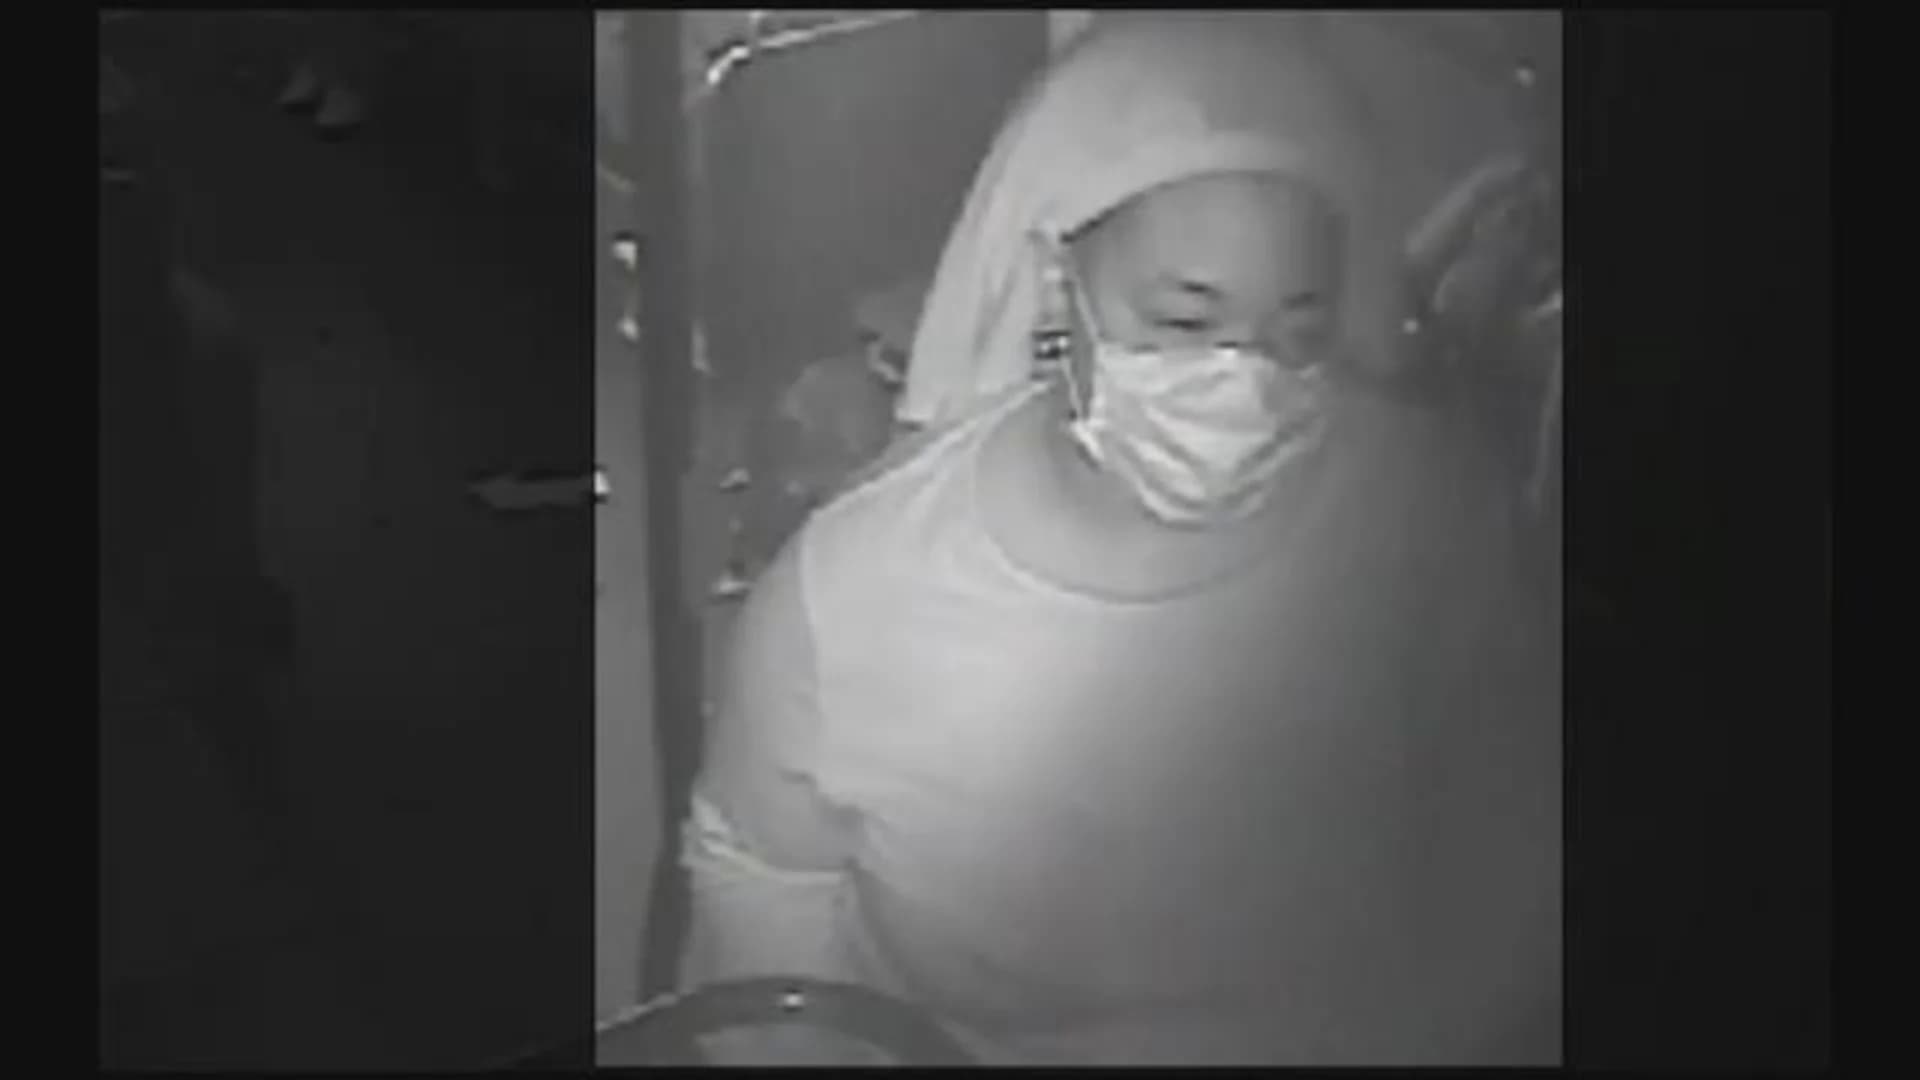 NYPD: Suspect wanted for assault on B15 bus driver